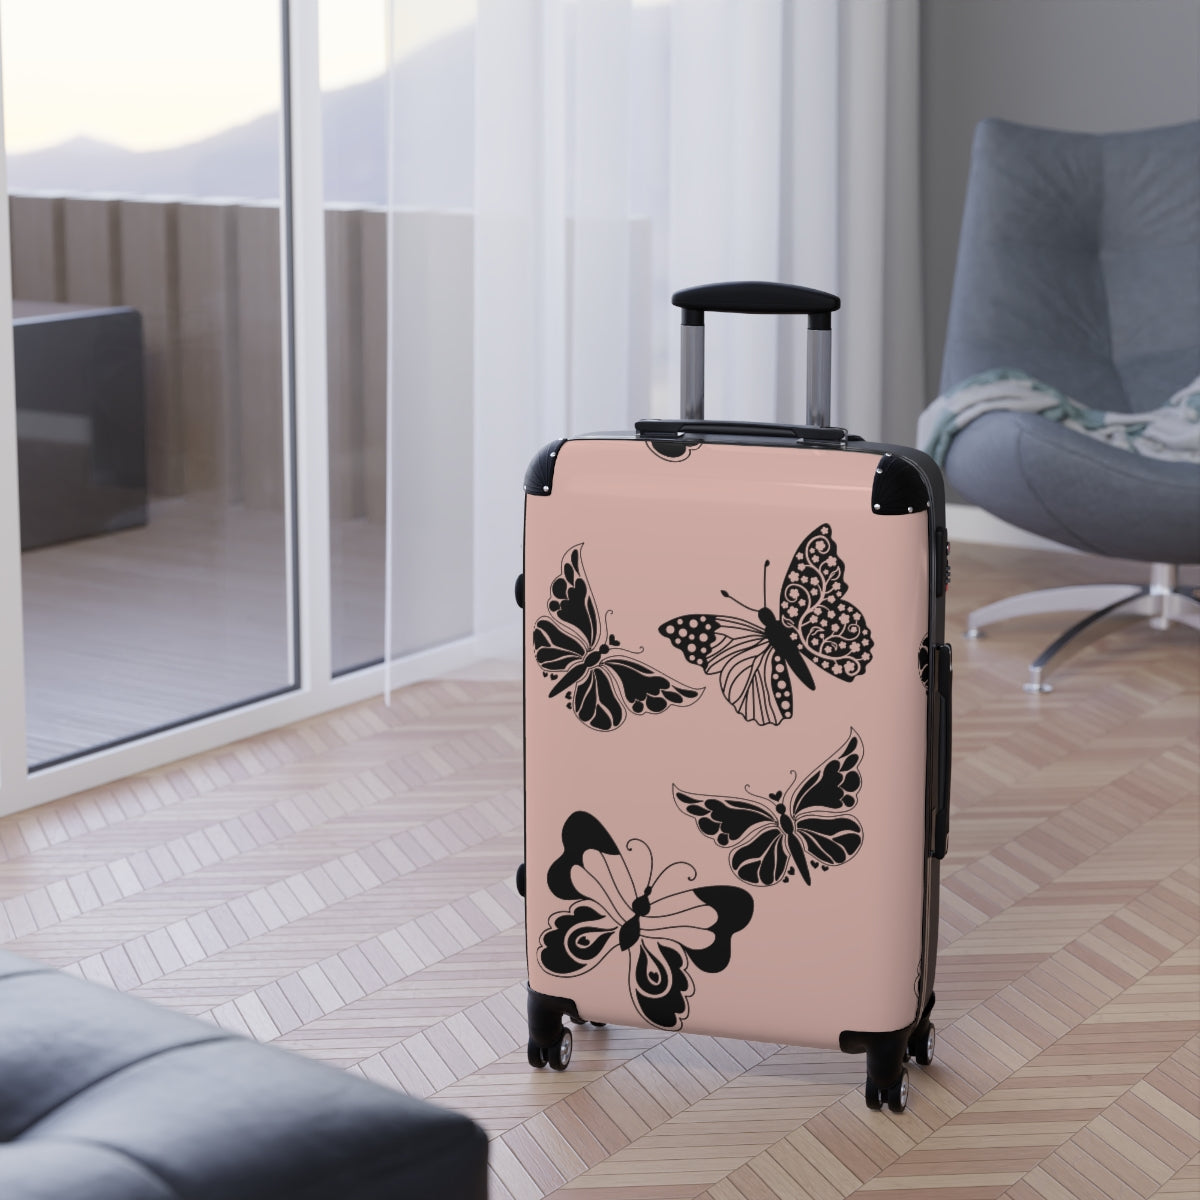 BUTTERFLY SUITCASE SET Artzira, Cabin Suitcase Carry-On Luggage, Trolly Travel Bags Double Wheeled Spinners, Women's Choice, Bridal Gift